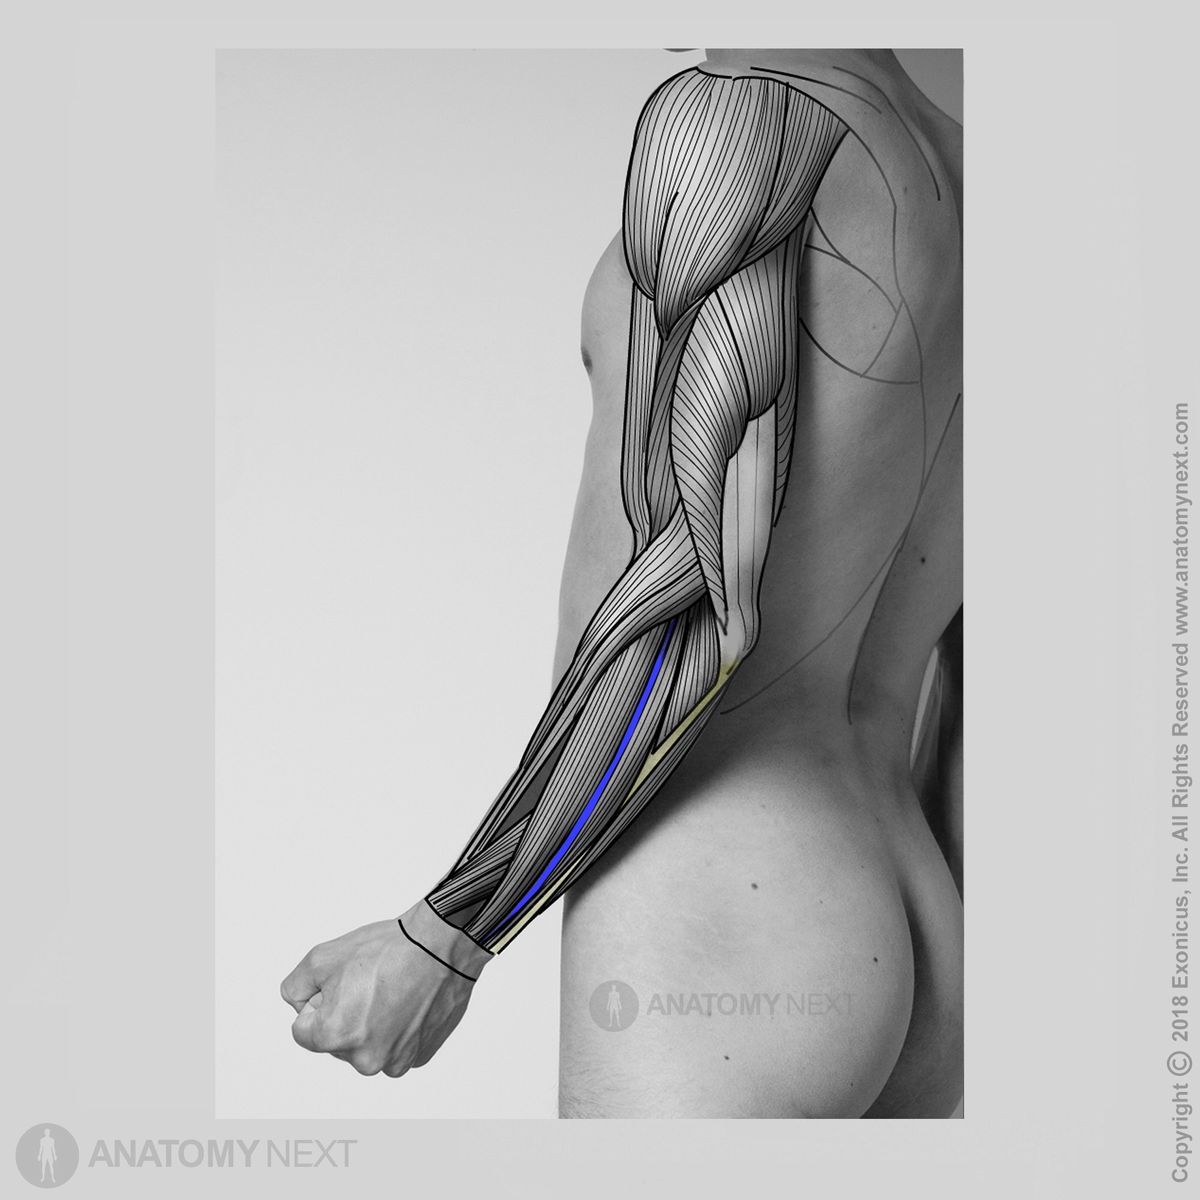 Extensor digiti minimi, Forearm muscles, Muscles of forearm, Posterior compartment of forearm muscles, Posterior compartment muscles, Human muscle, Arm muscles, Extensors